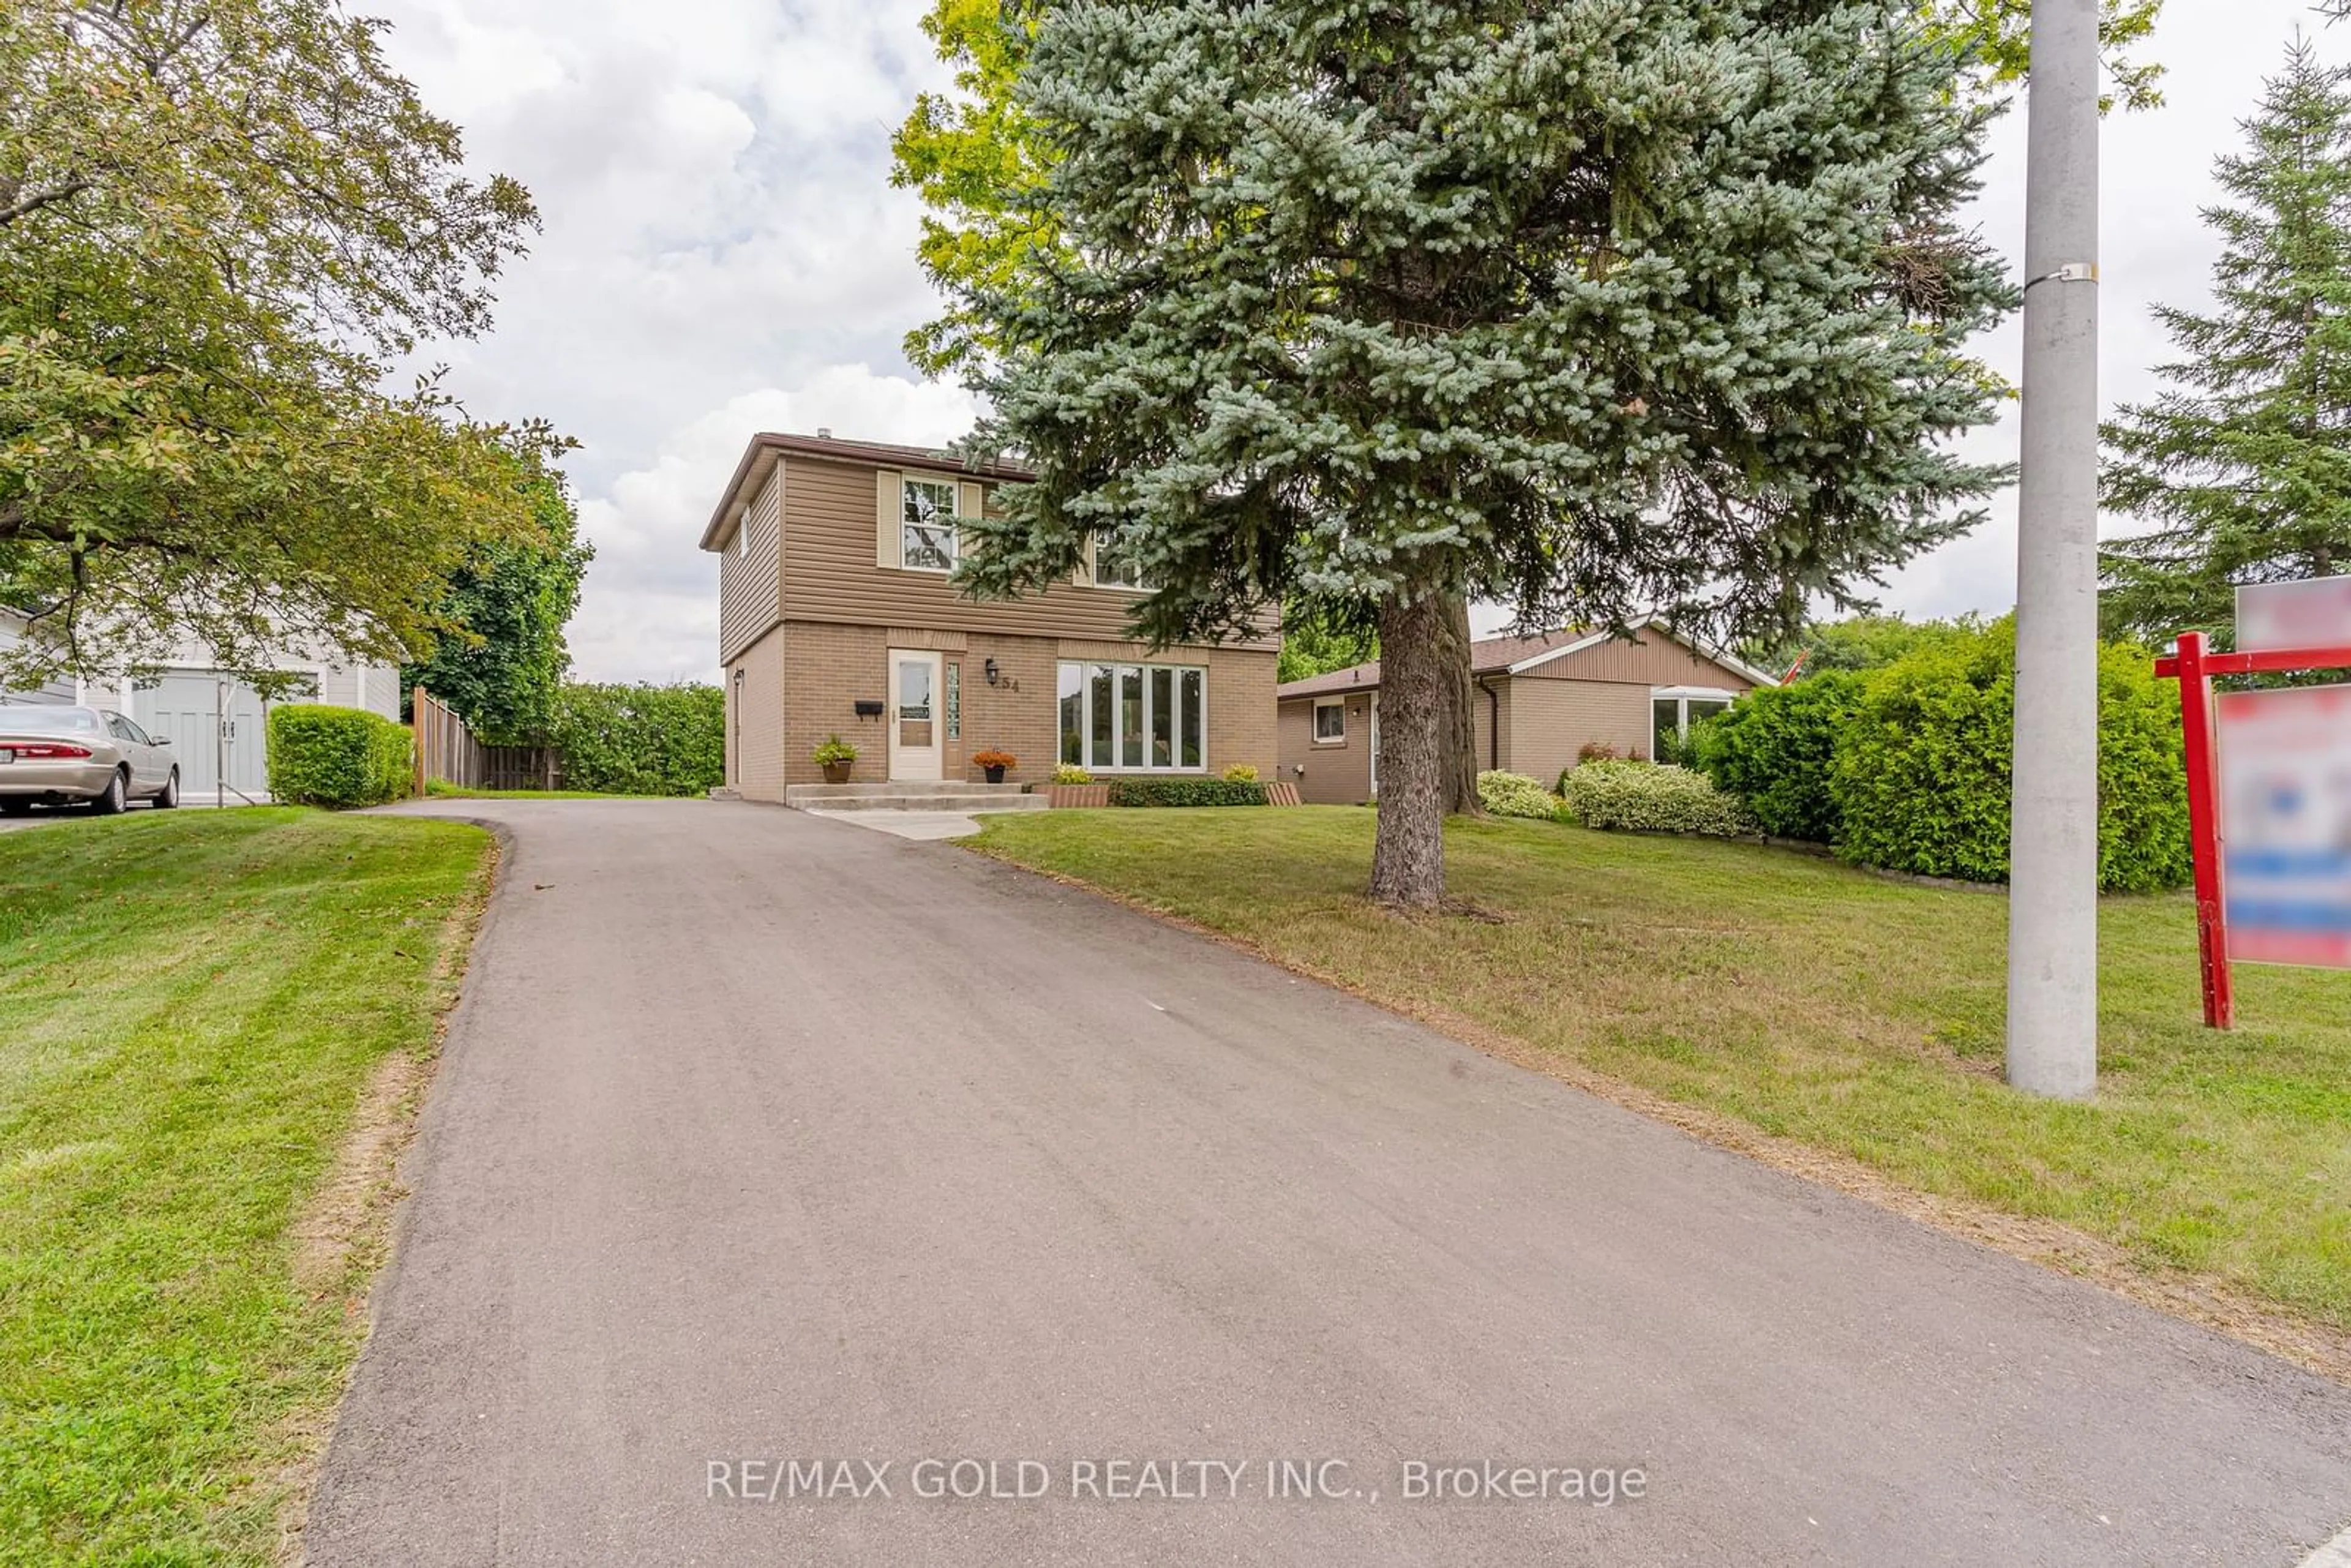 Outside view for 54 Dunblaine Cres, Brampton Ontario L6T 3H2